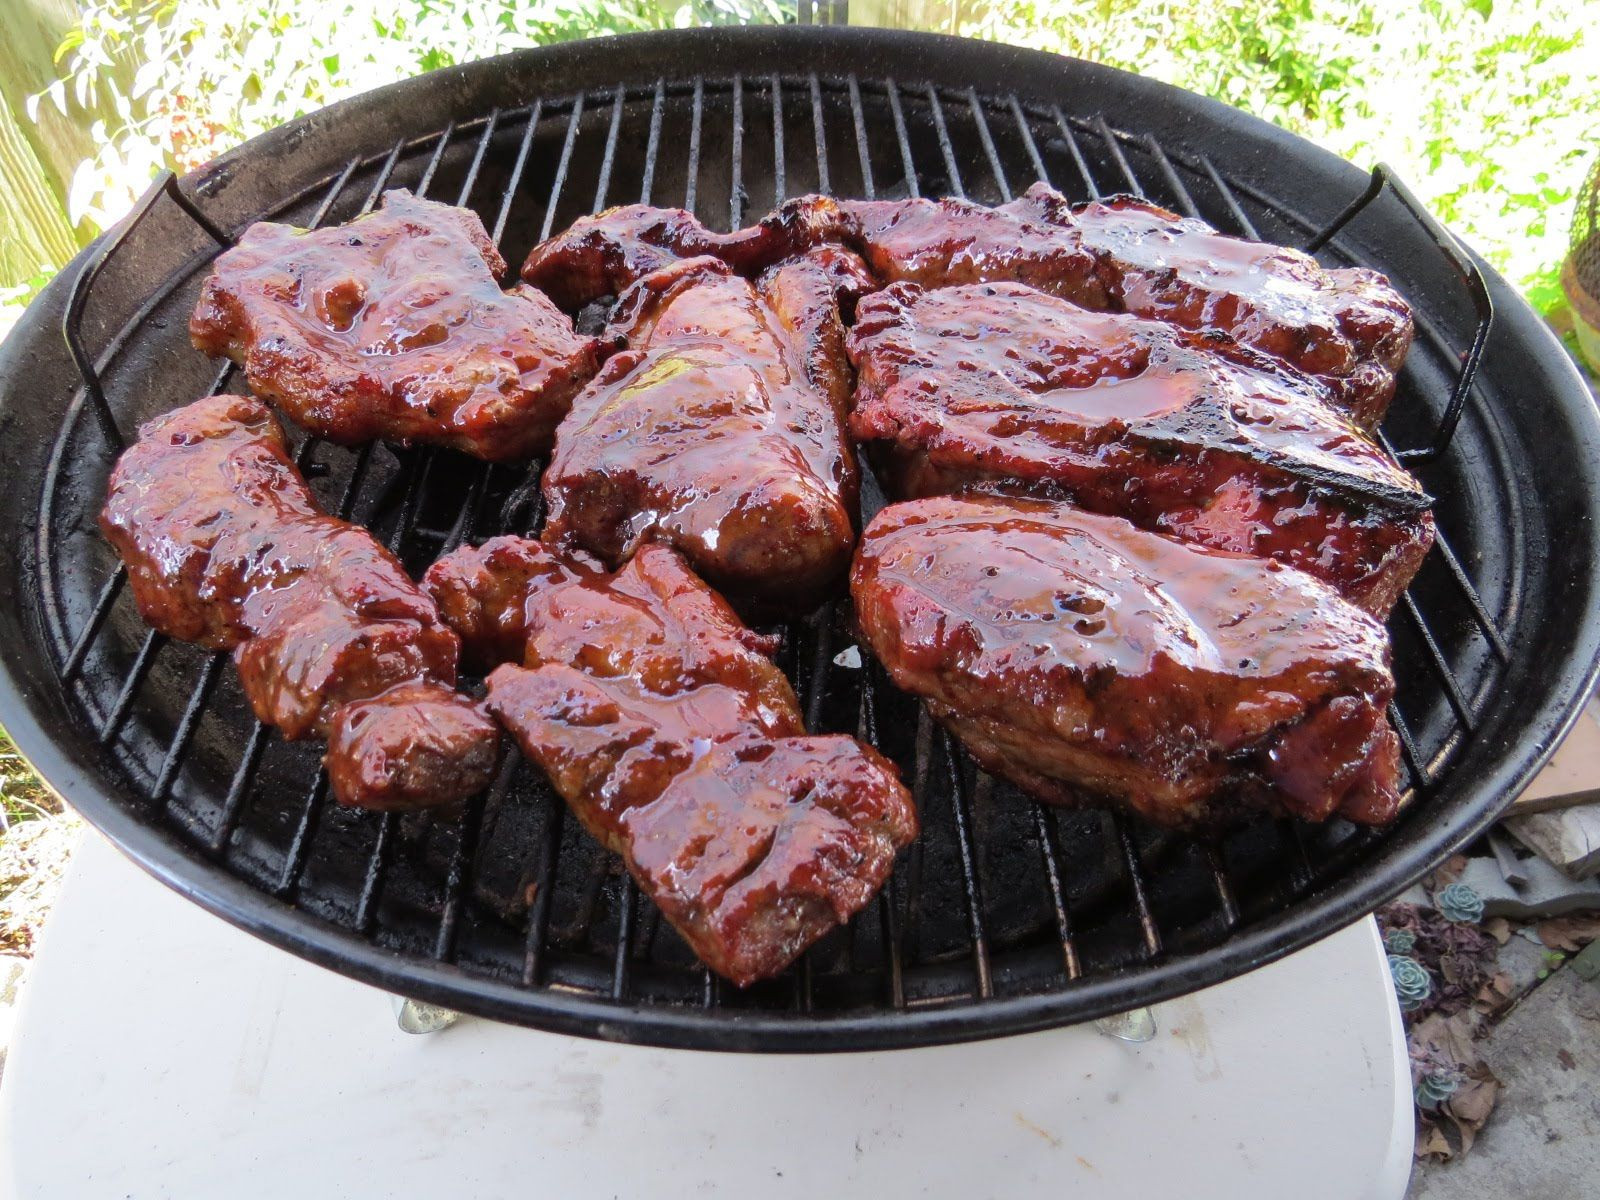 Grilled Bone In Country Style Pork Ribs
 Best Pork Shoulder Country Style Ribs in You Know You Want